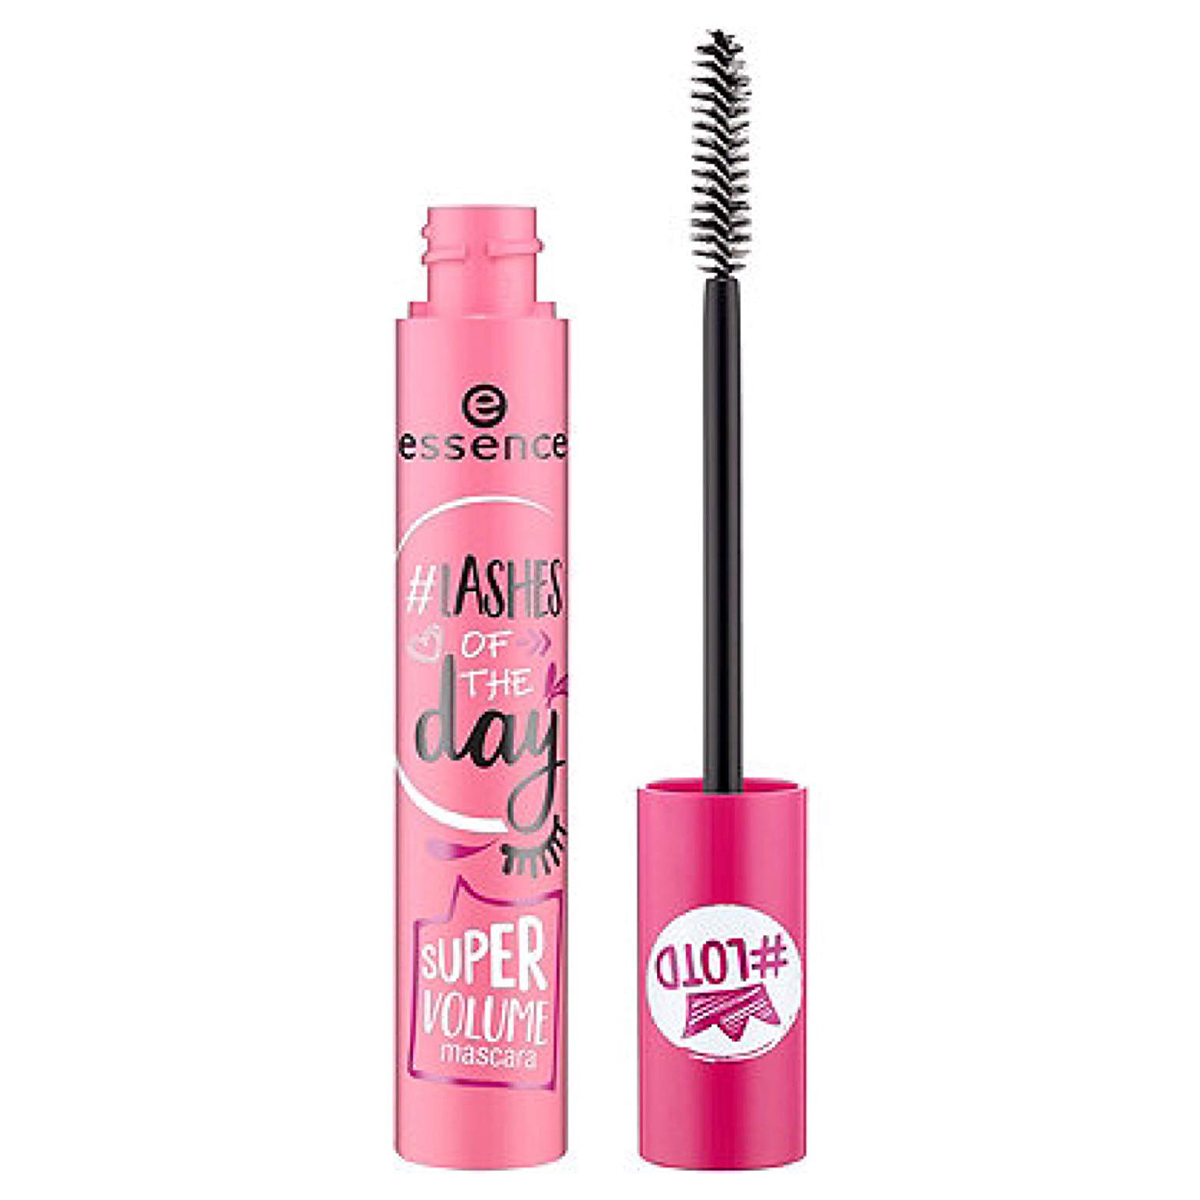 Essence #Lashes of the Day Super Volume Mascara